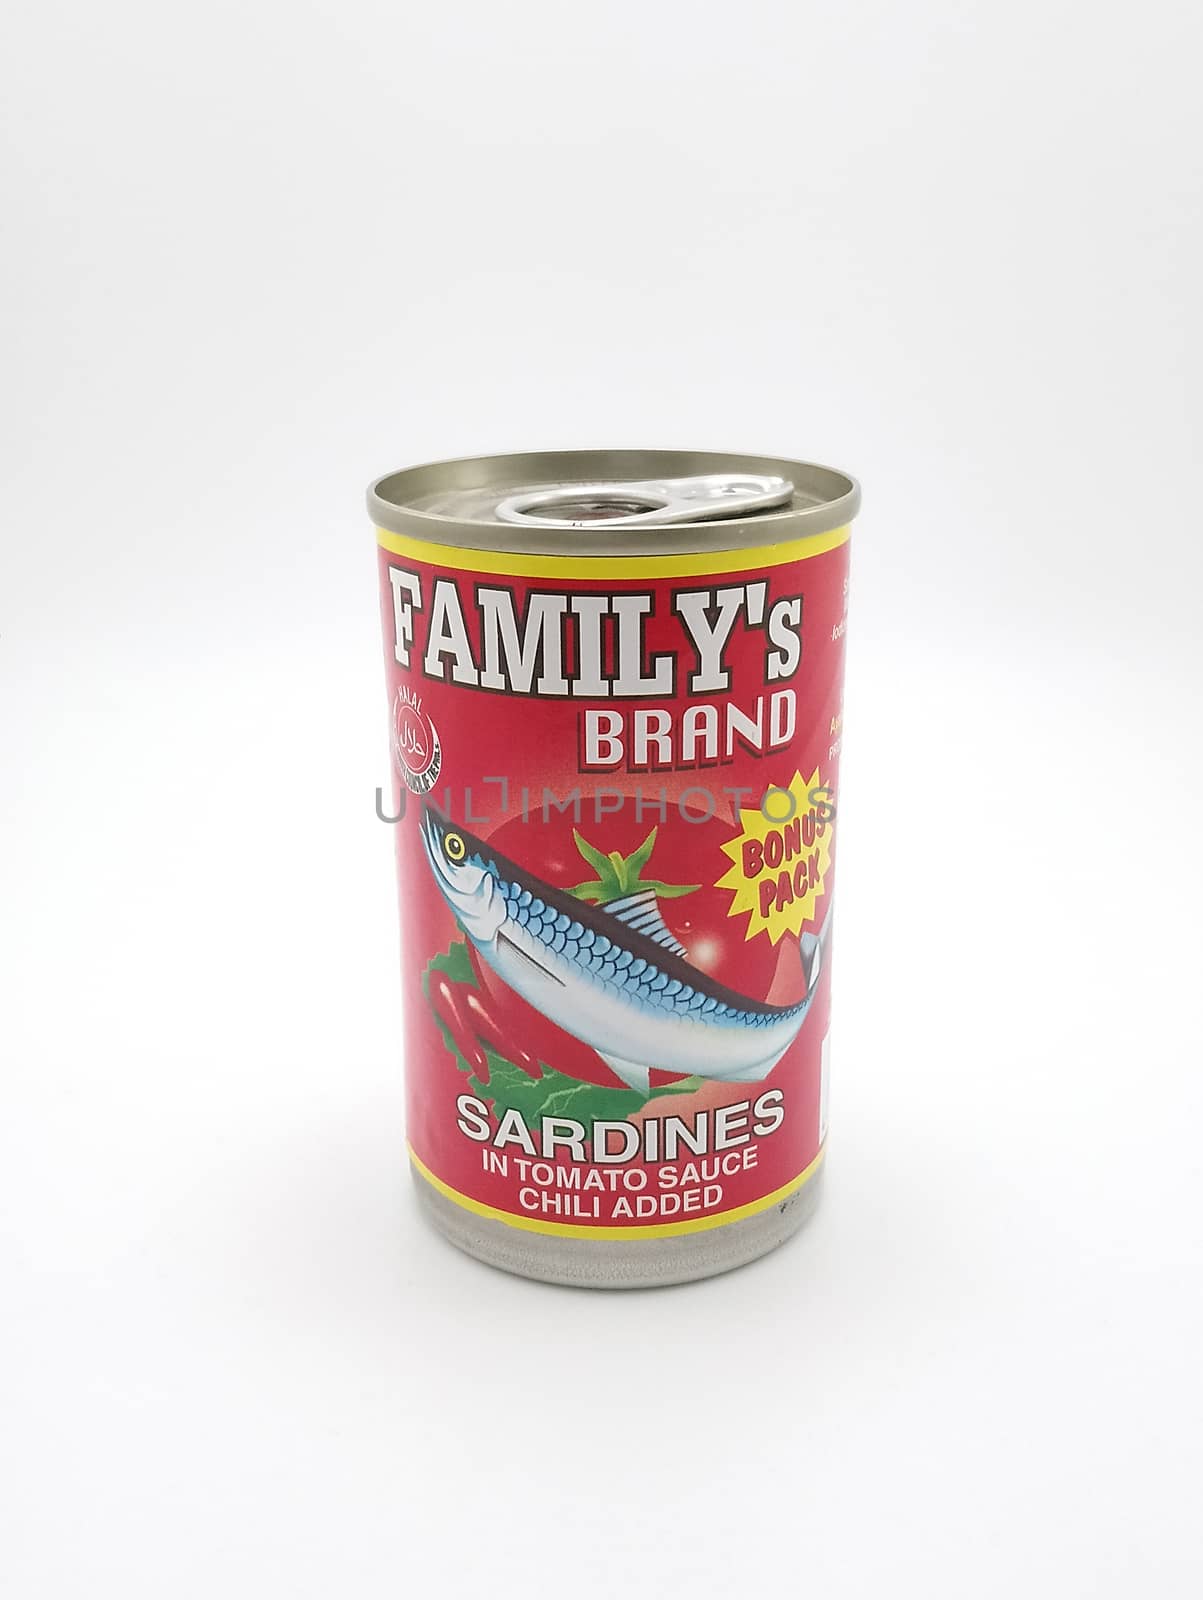 Familys brand sardines in tomato sauce with chili in Manila, Phi by imwaltersy